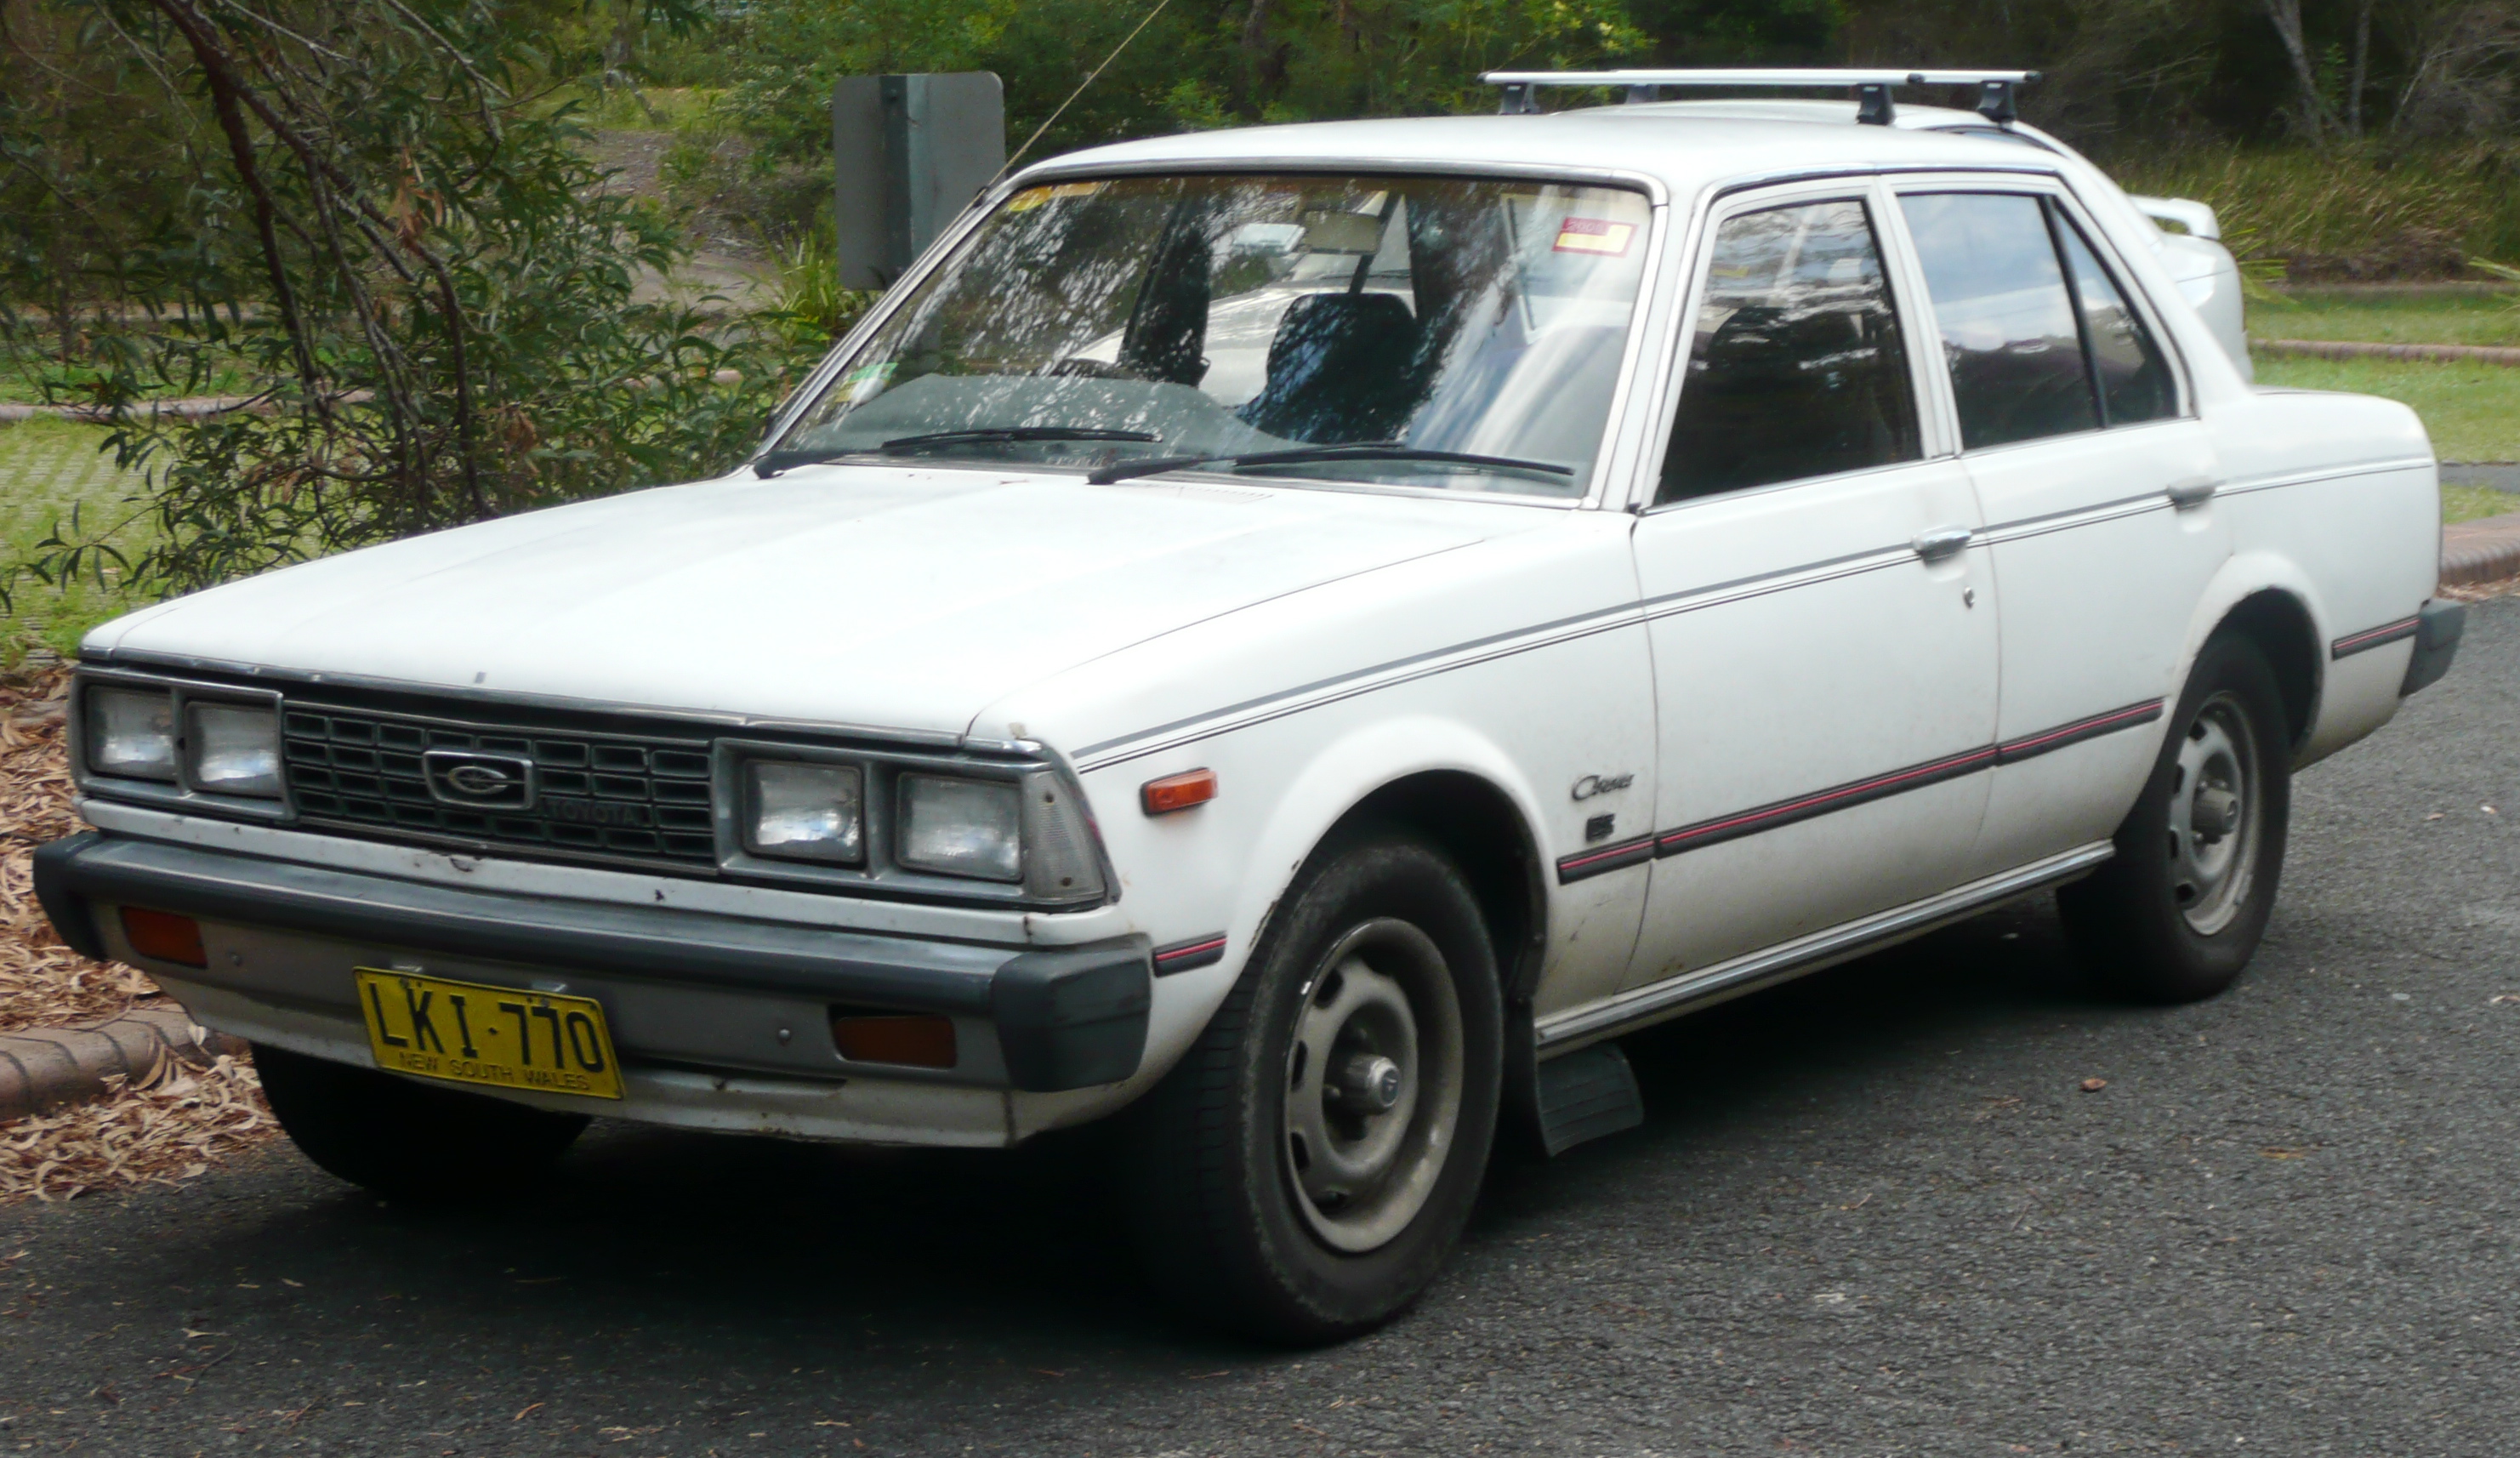 Model Toyota Corona is begining 1957 in Japan. The end of make is 2001.